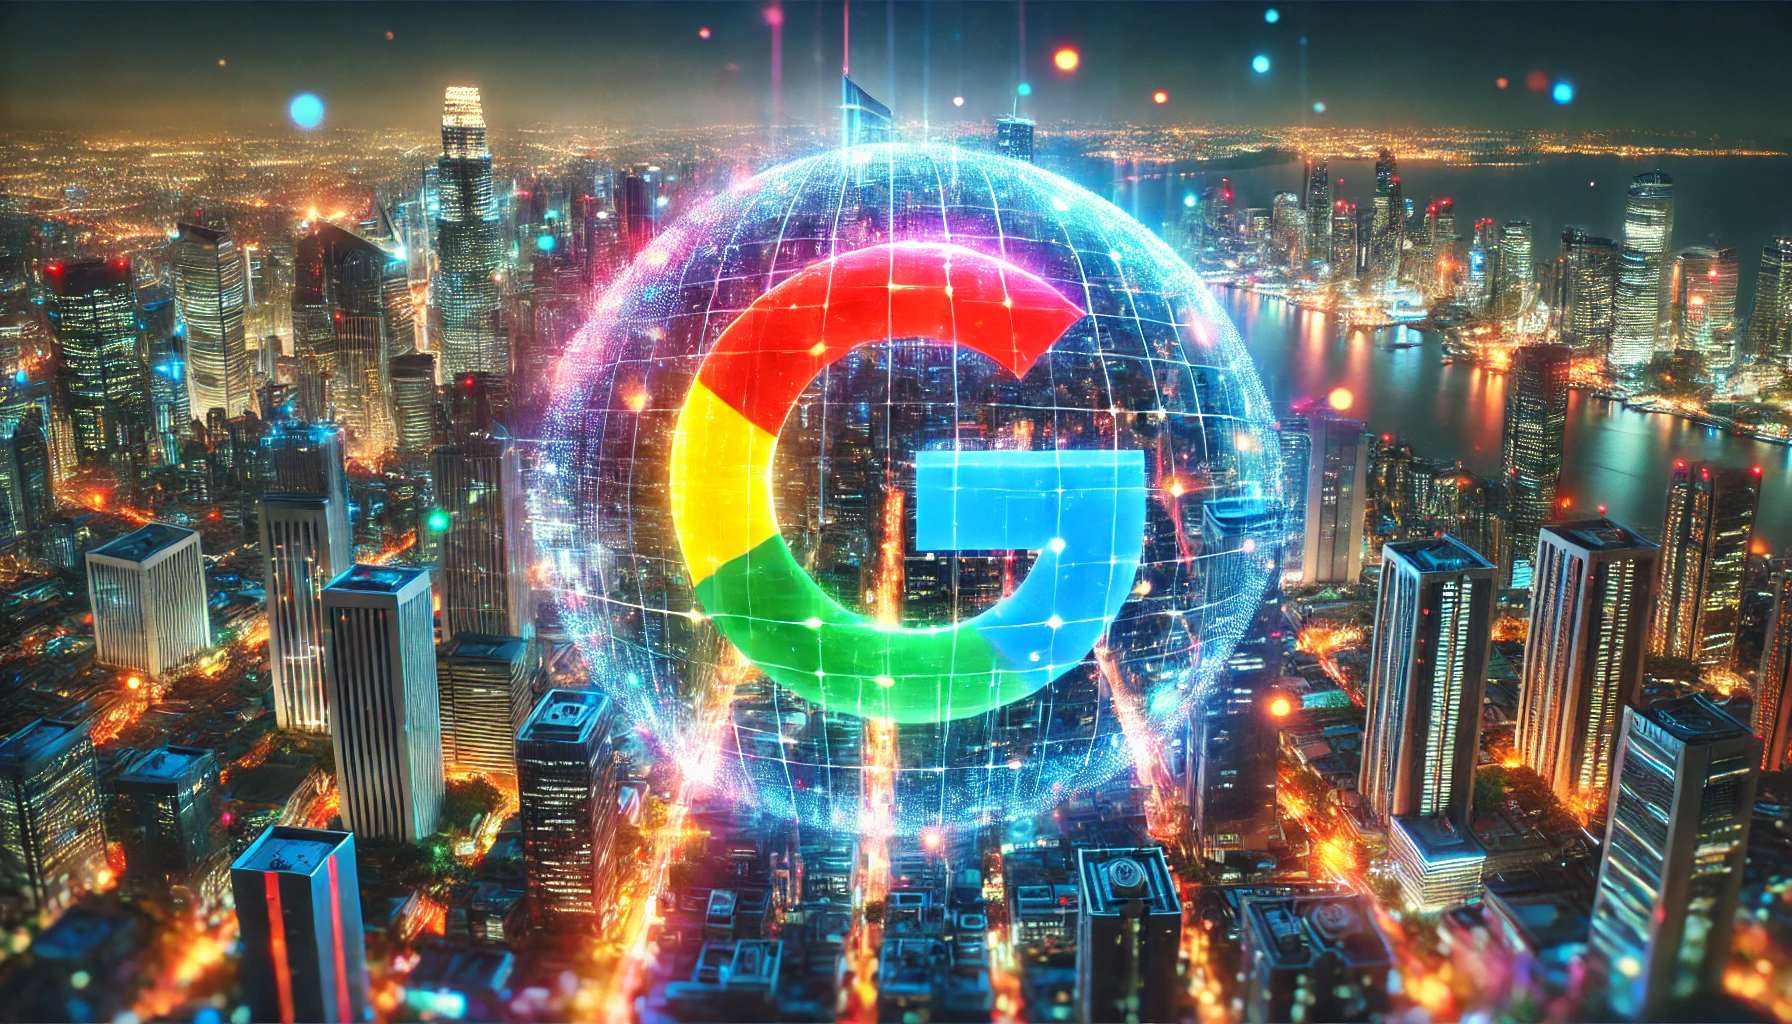 A futuristic cityscape at night with a semi-transparent overlay of Google's colorful logo, symbolizing the integration of Google artificial intelligence into the urban environment.